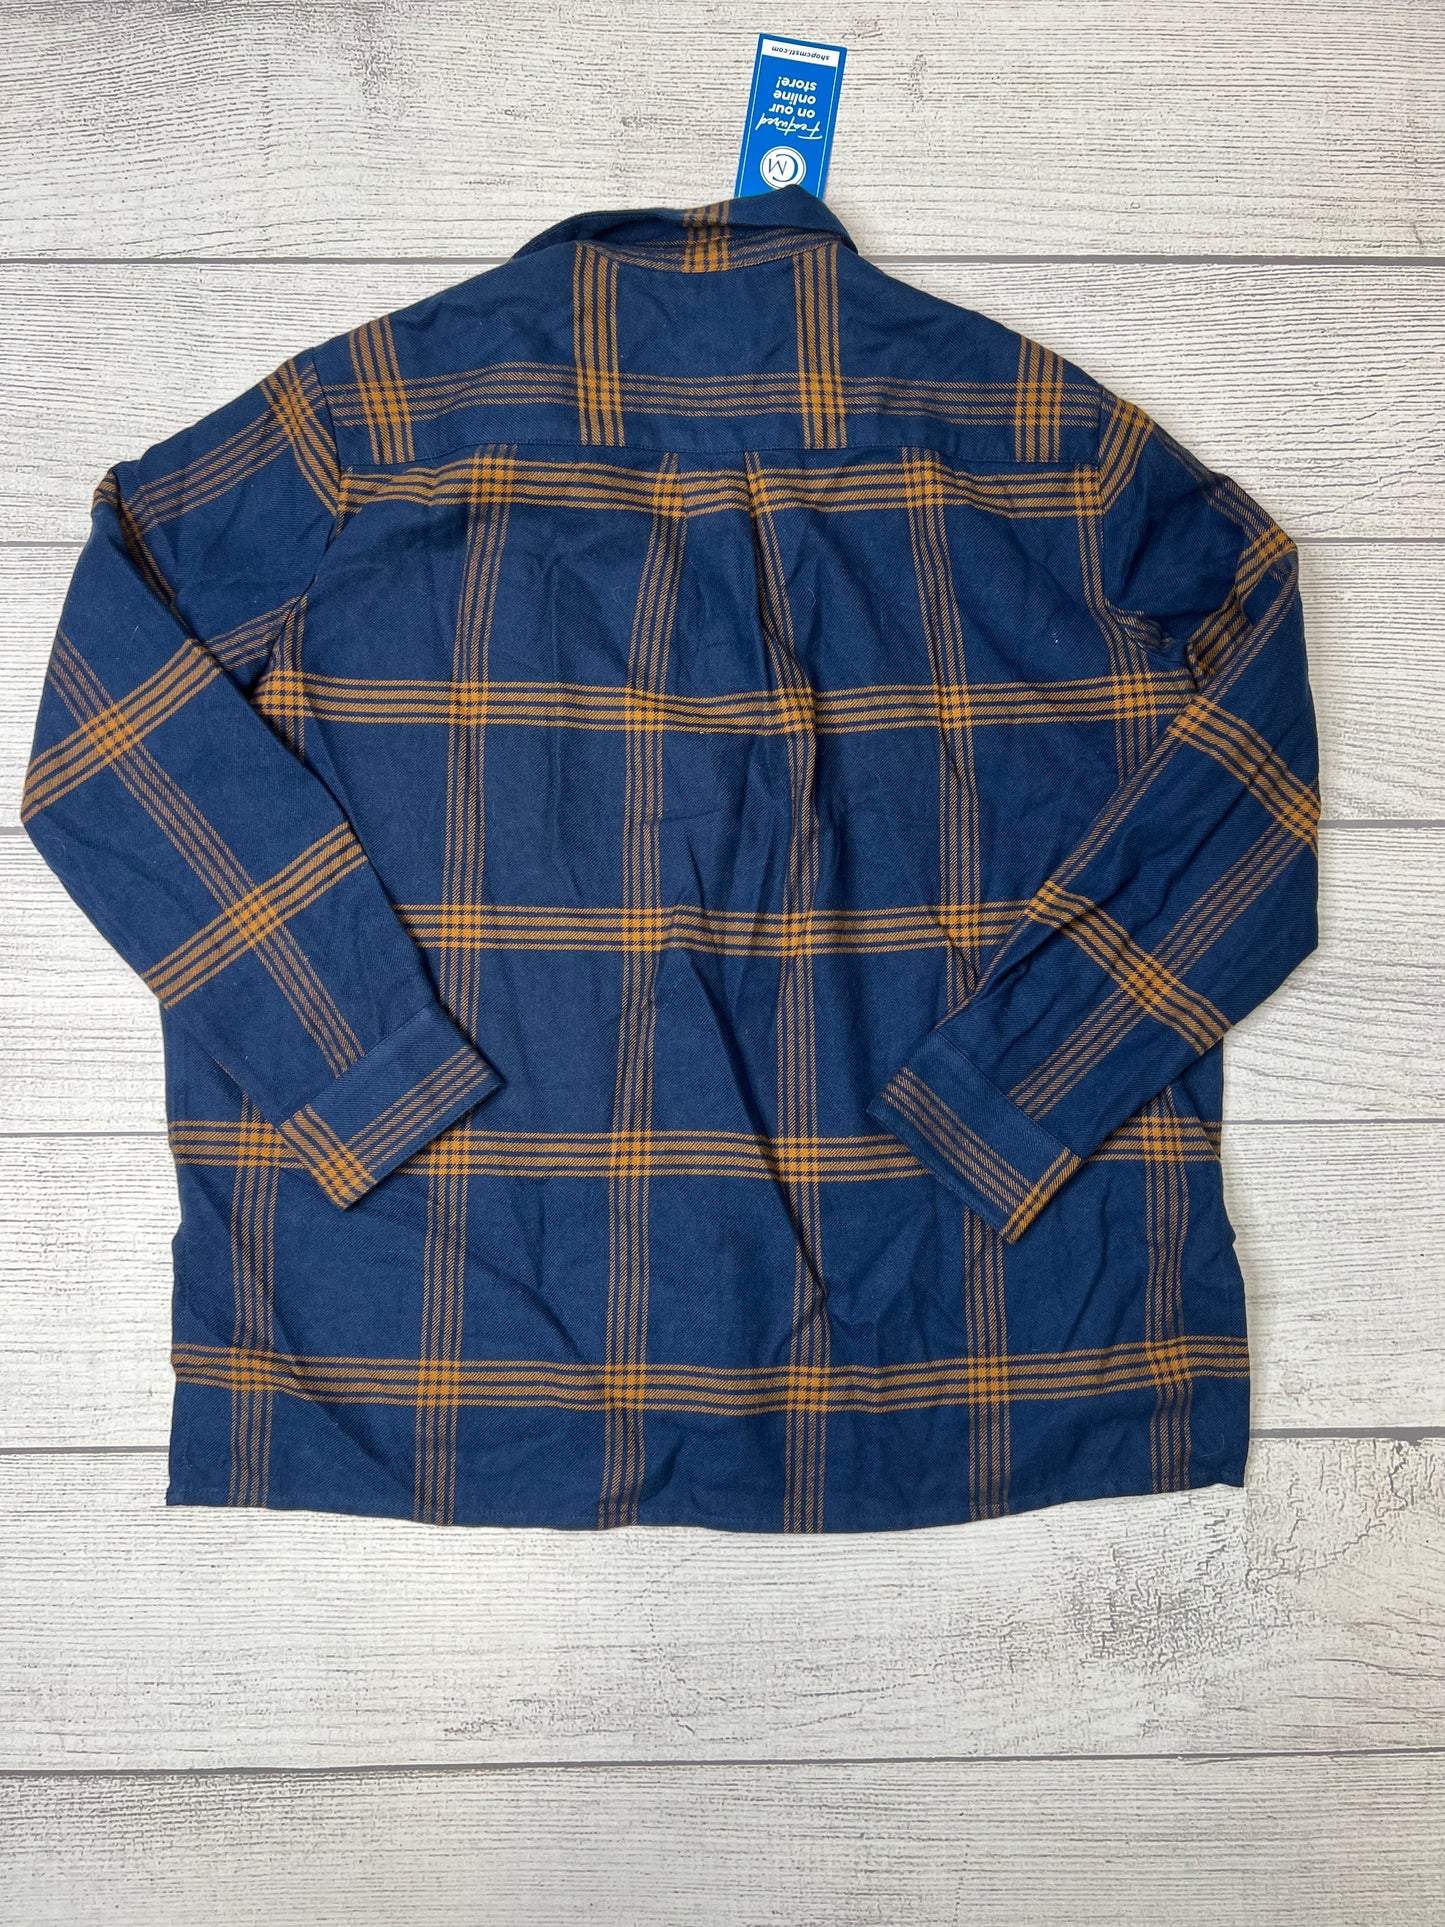 Blue Blouse Long Sleeve Madewell, Size M